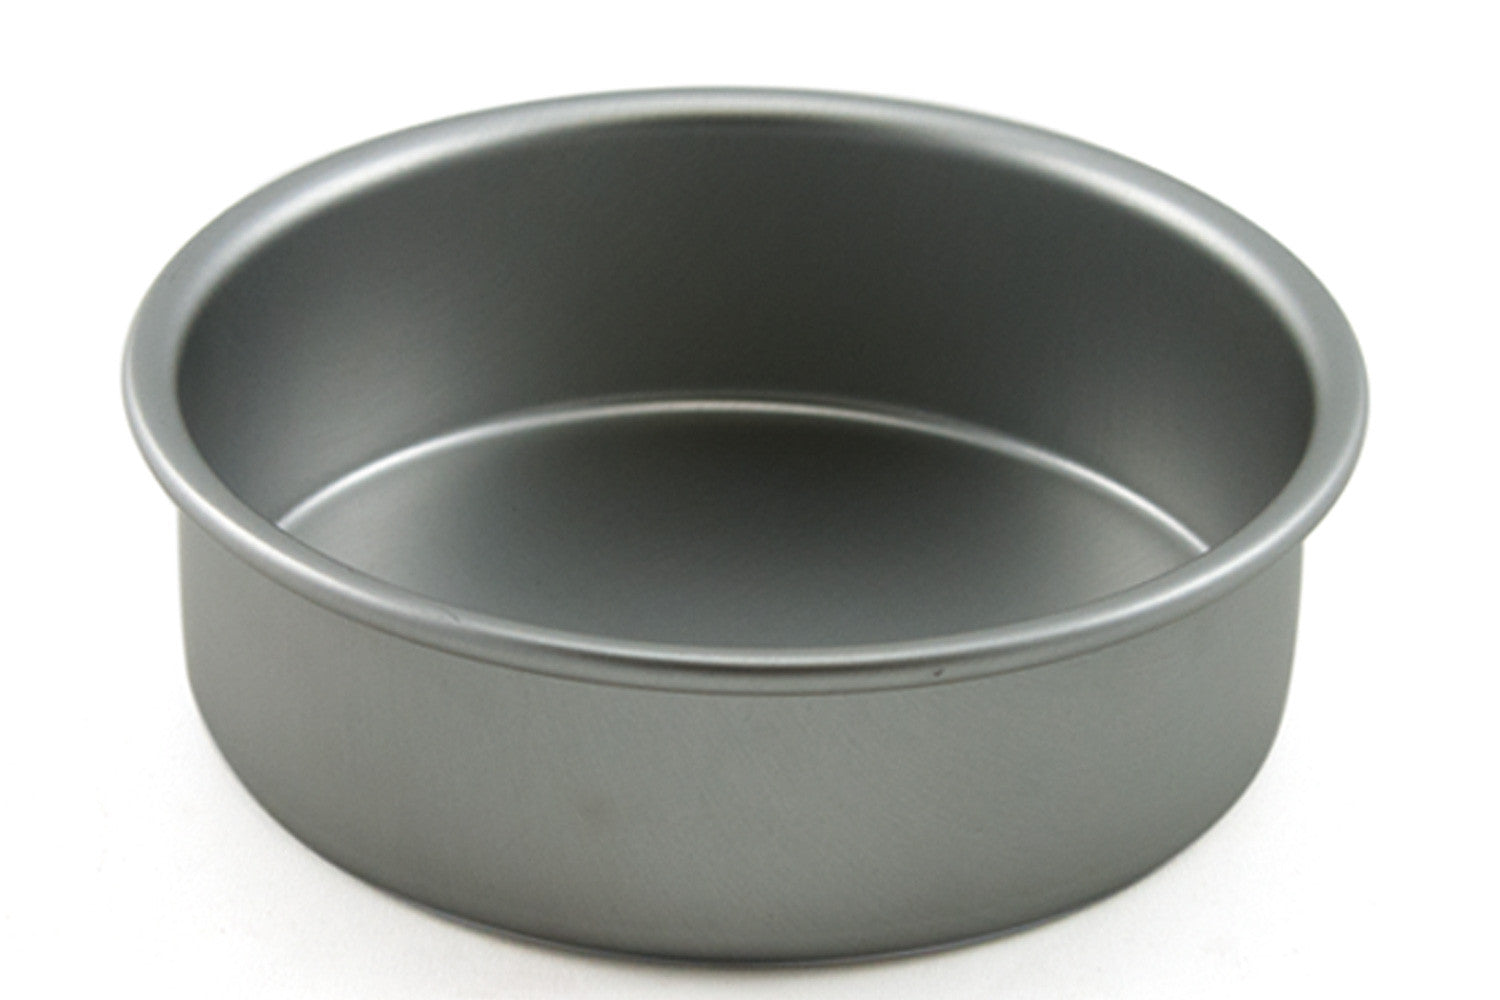 Deep Dish Pizza Pan Tray Stainless Steel Oven 14x1.8 Inch NEW